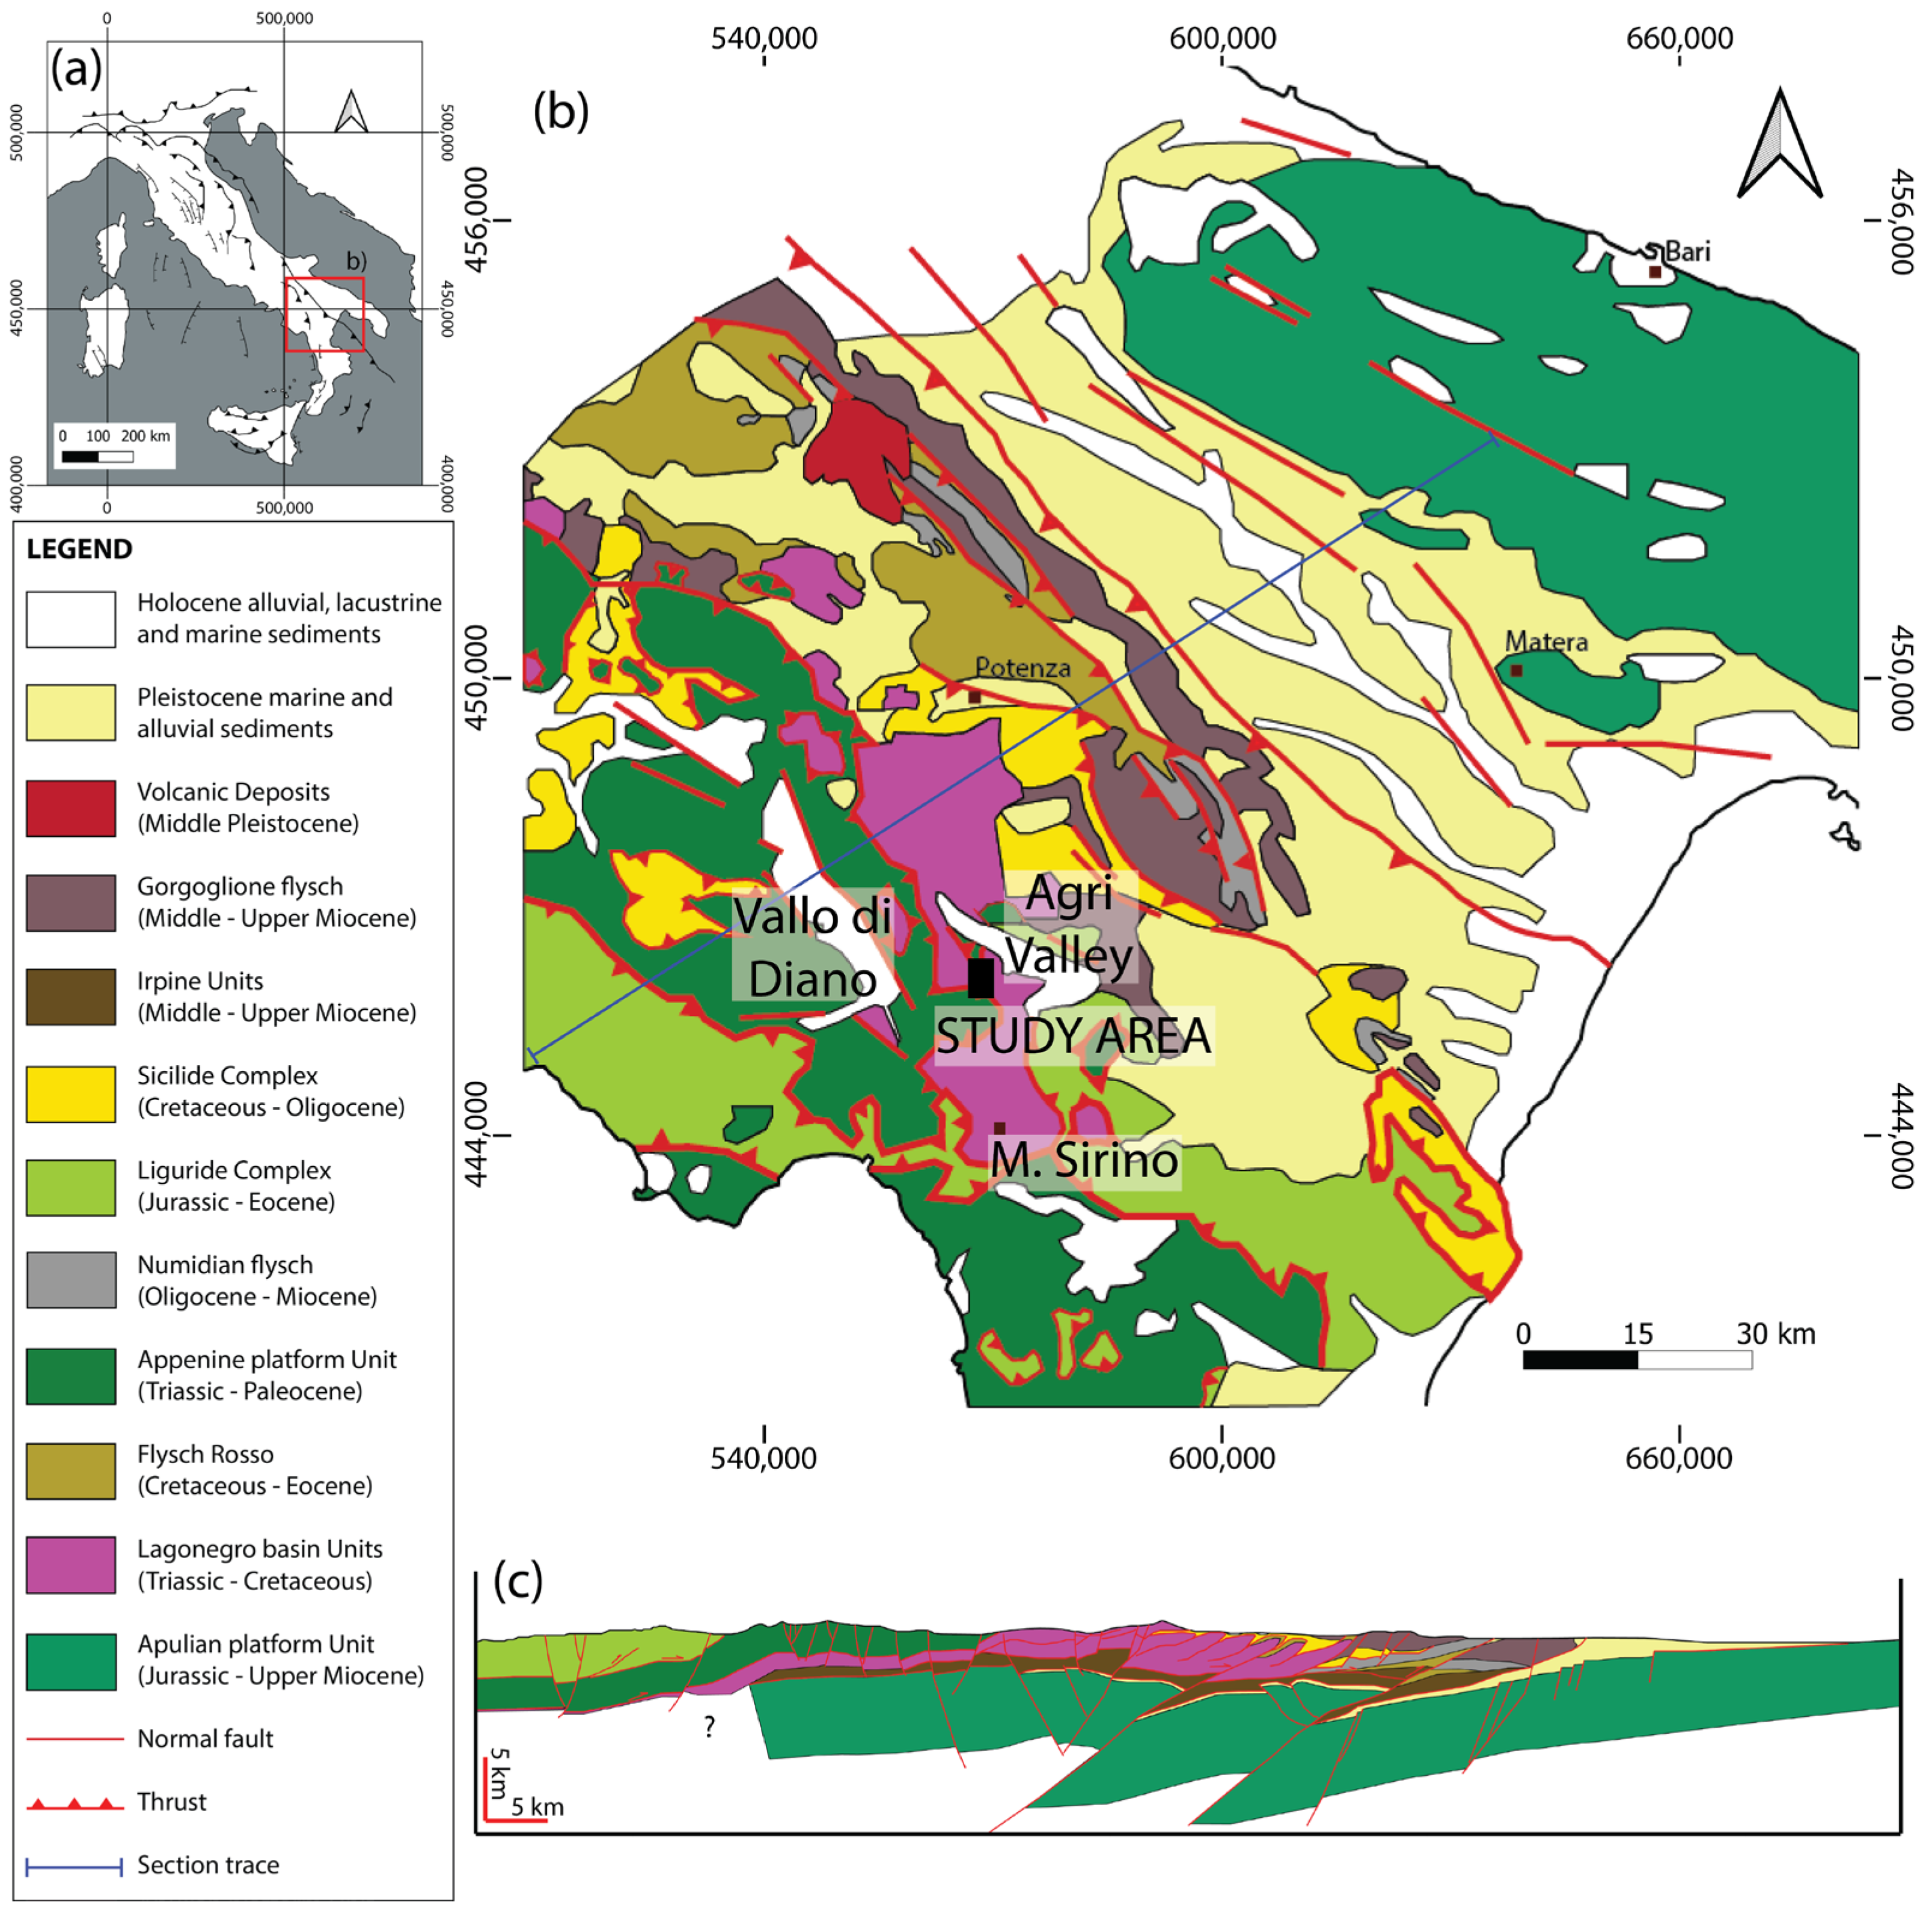 Geosciences | Free Full-Text | Investigation of the Geological Structure of  the Tramutola Area (Agri Valley): Inferences for the Presence of Geofluids  at Shallow Crustal Levels